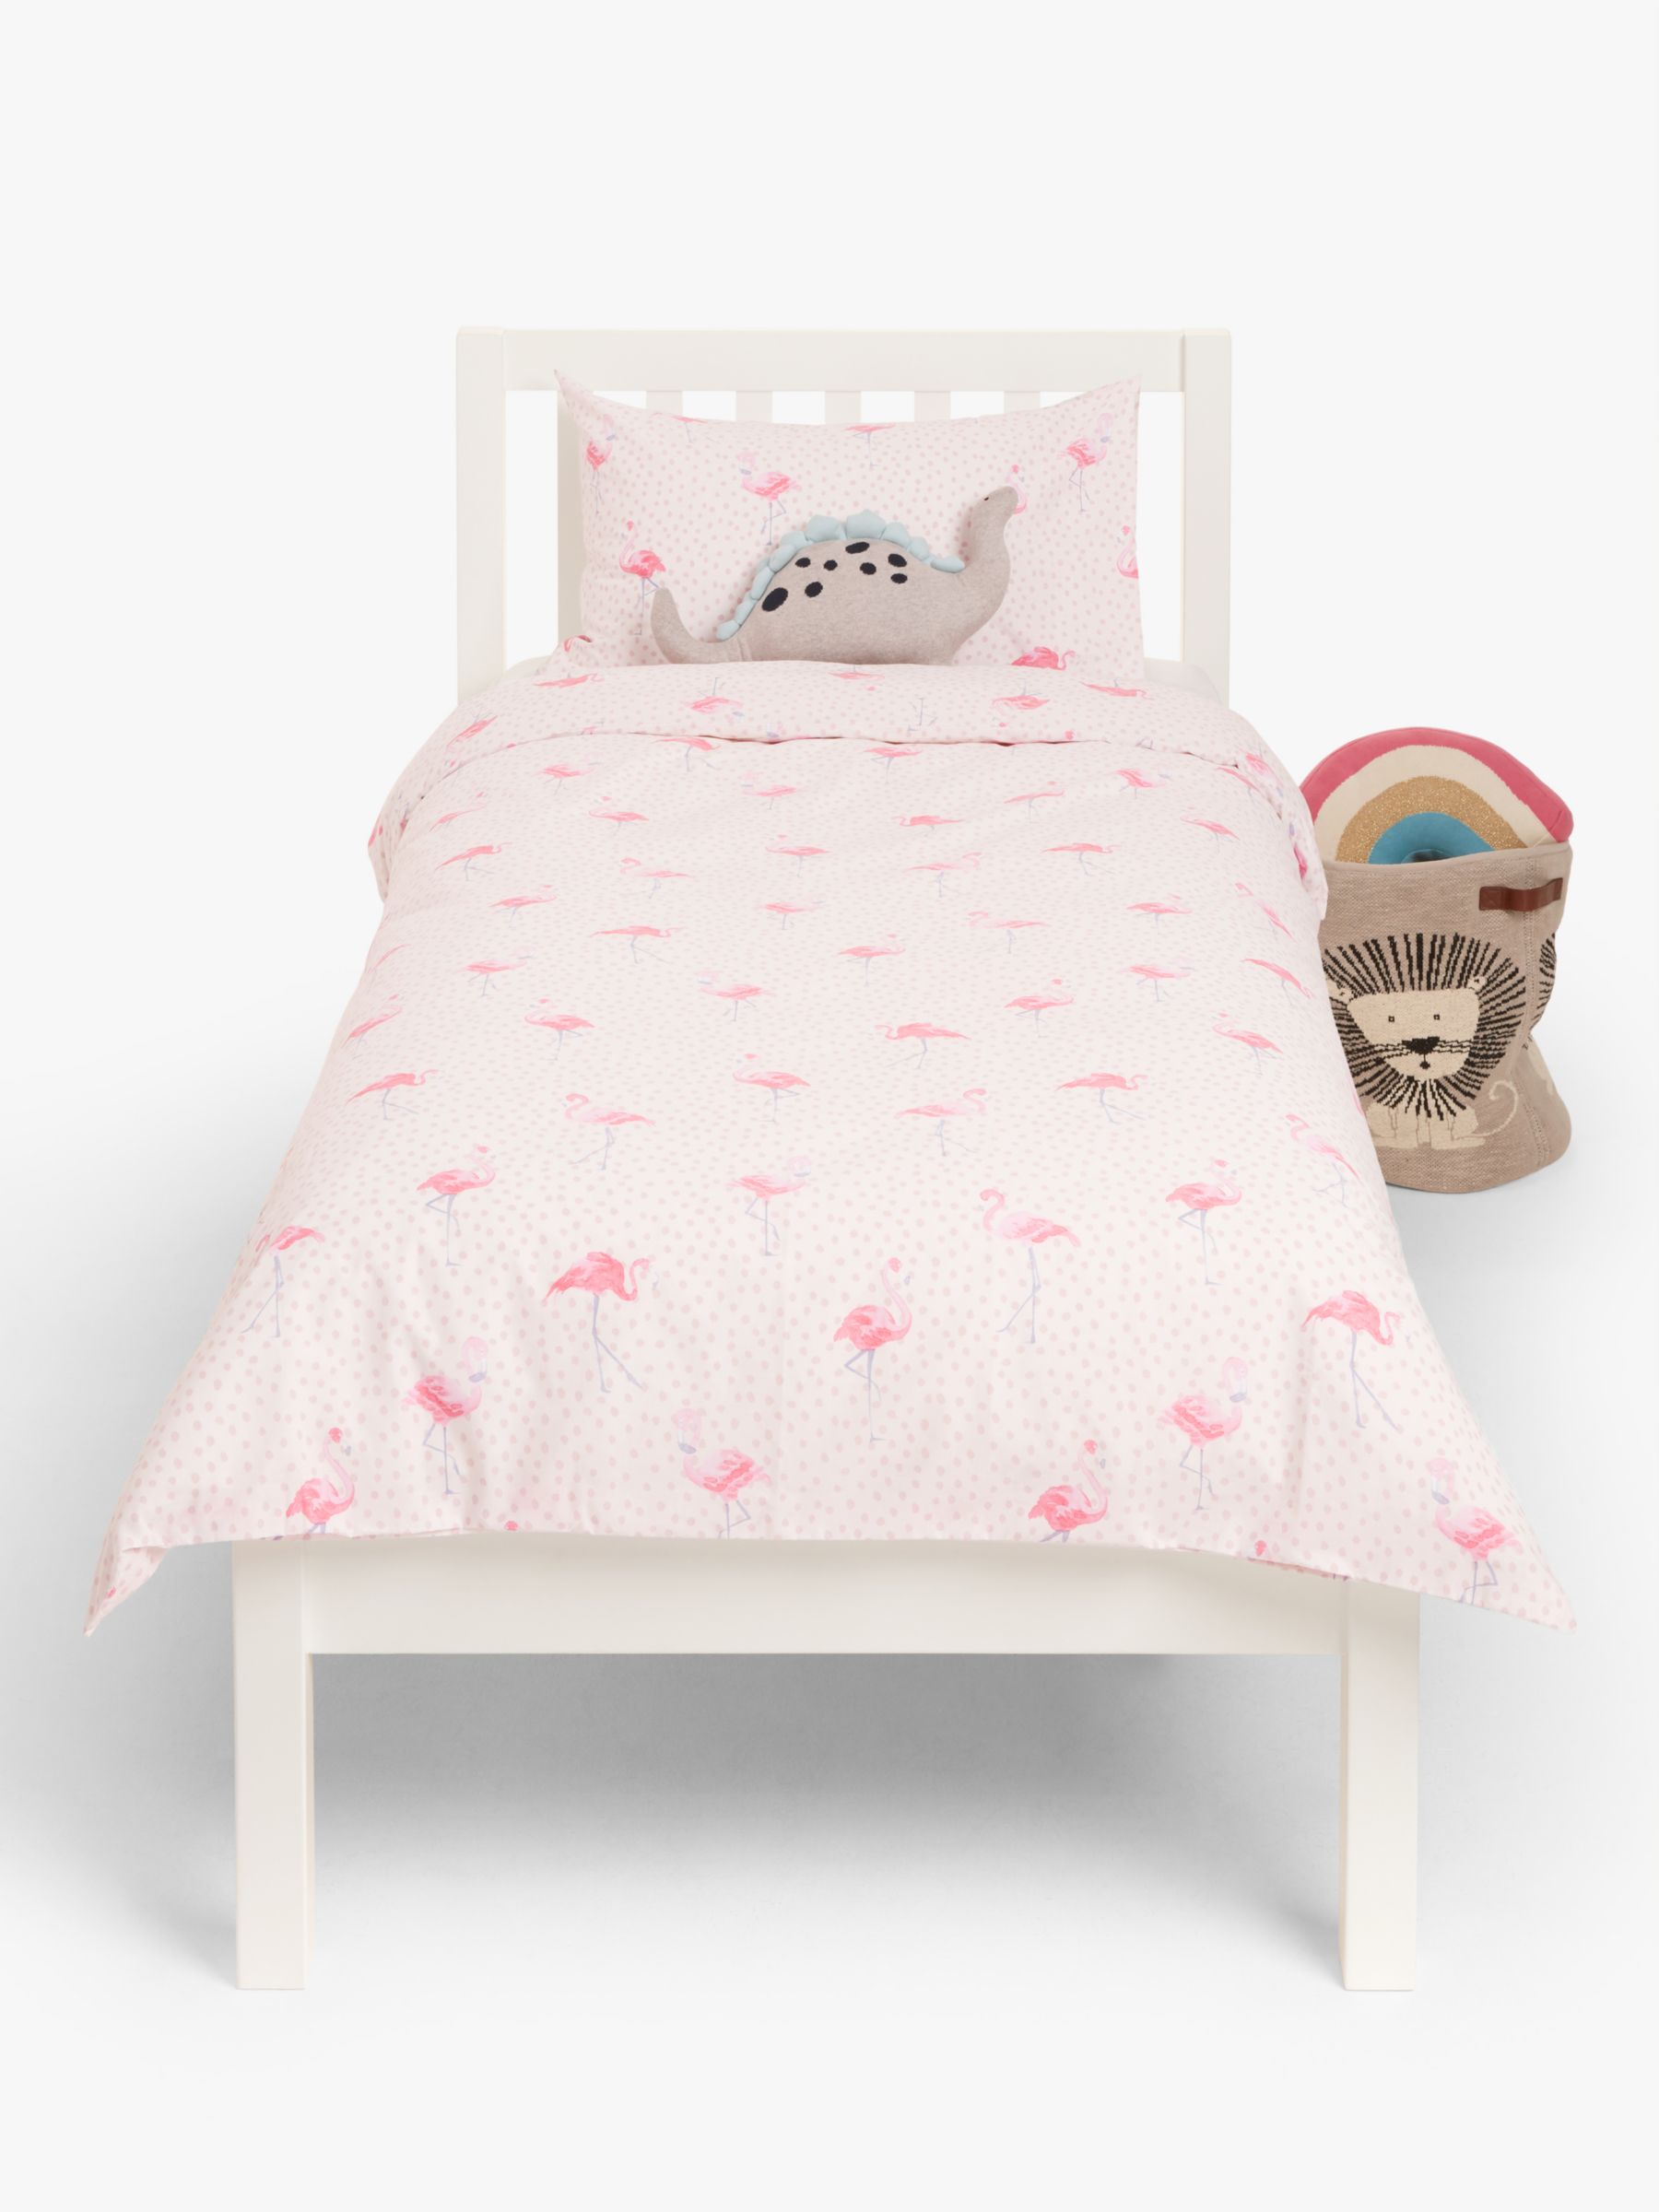 Little Home At John Lewis Phoebe Flamingo Duvet Cover And